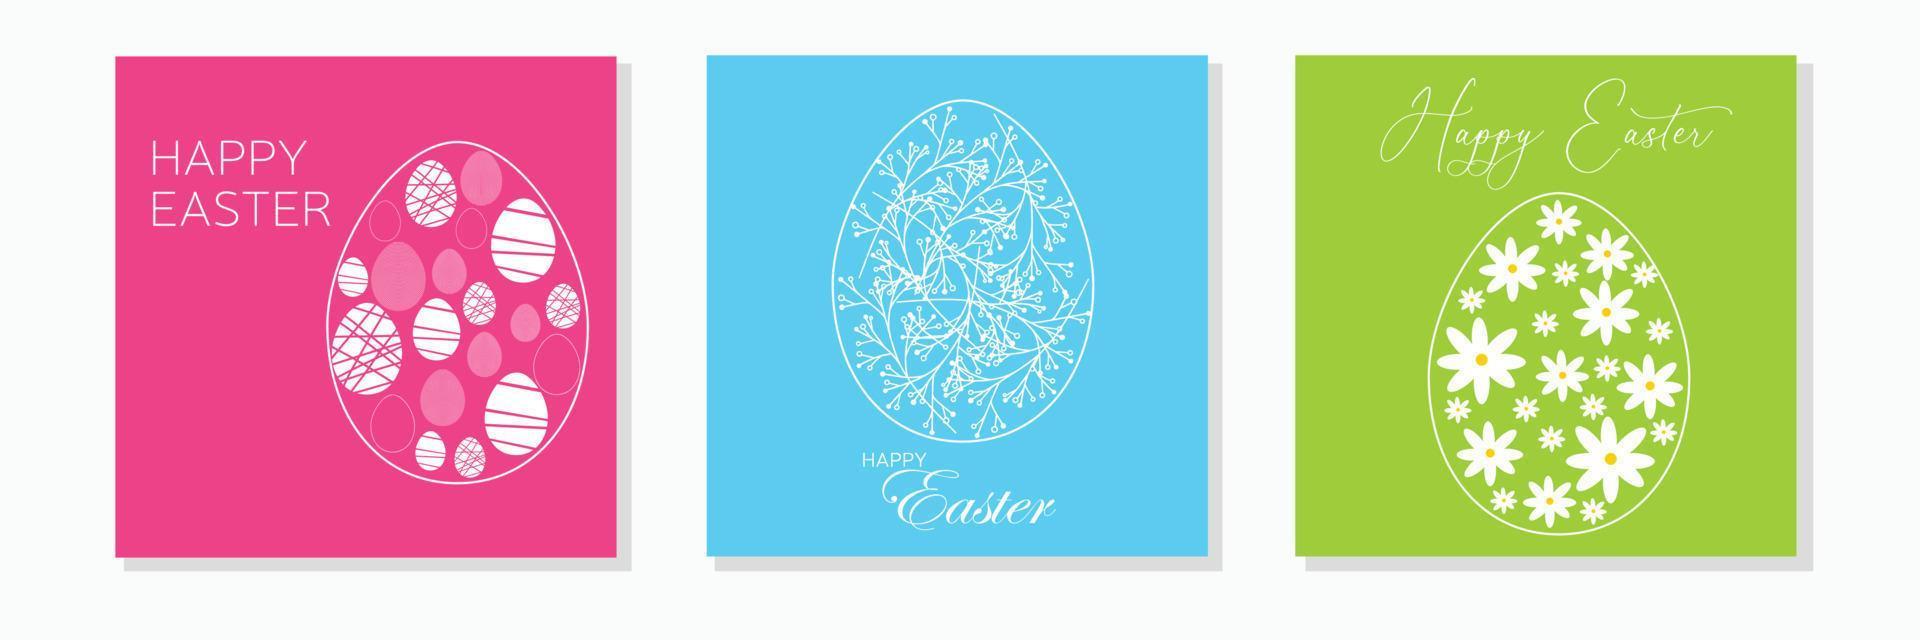 Square card for Easter. Banner or card for Easter holiday with abstract eggs. Vector illustration.